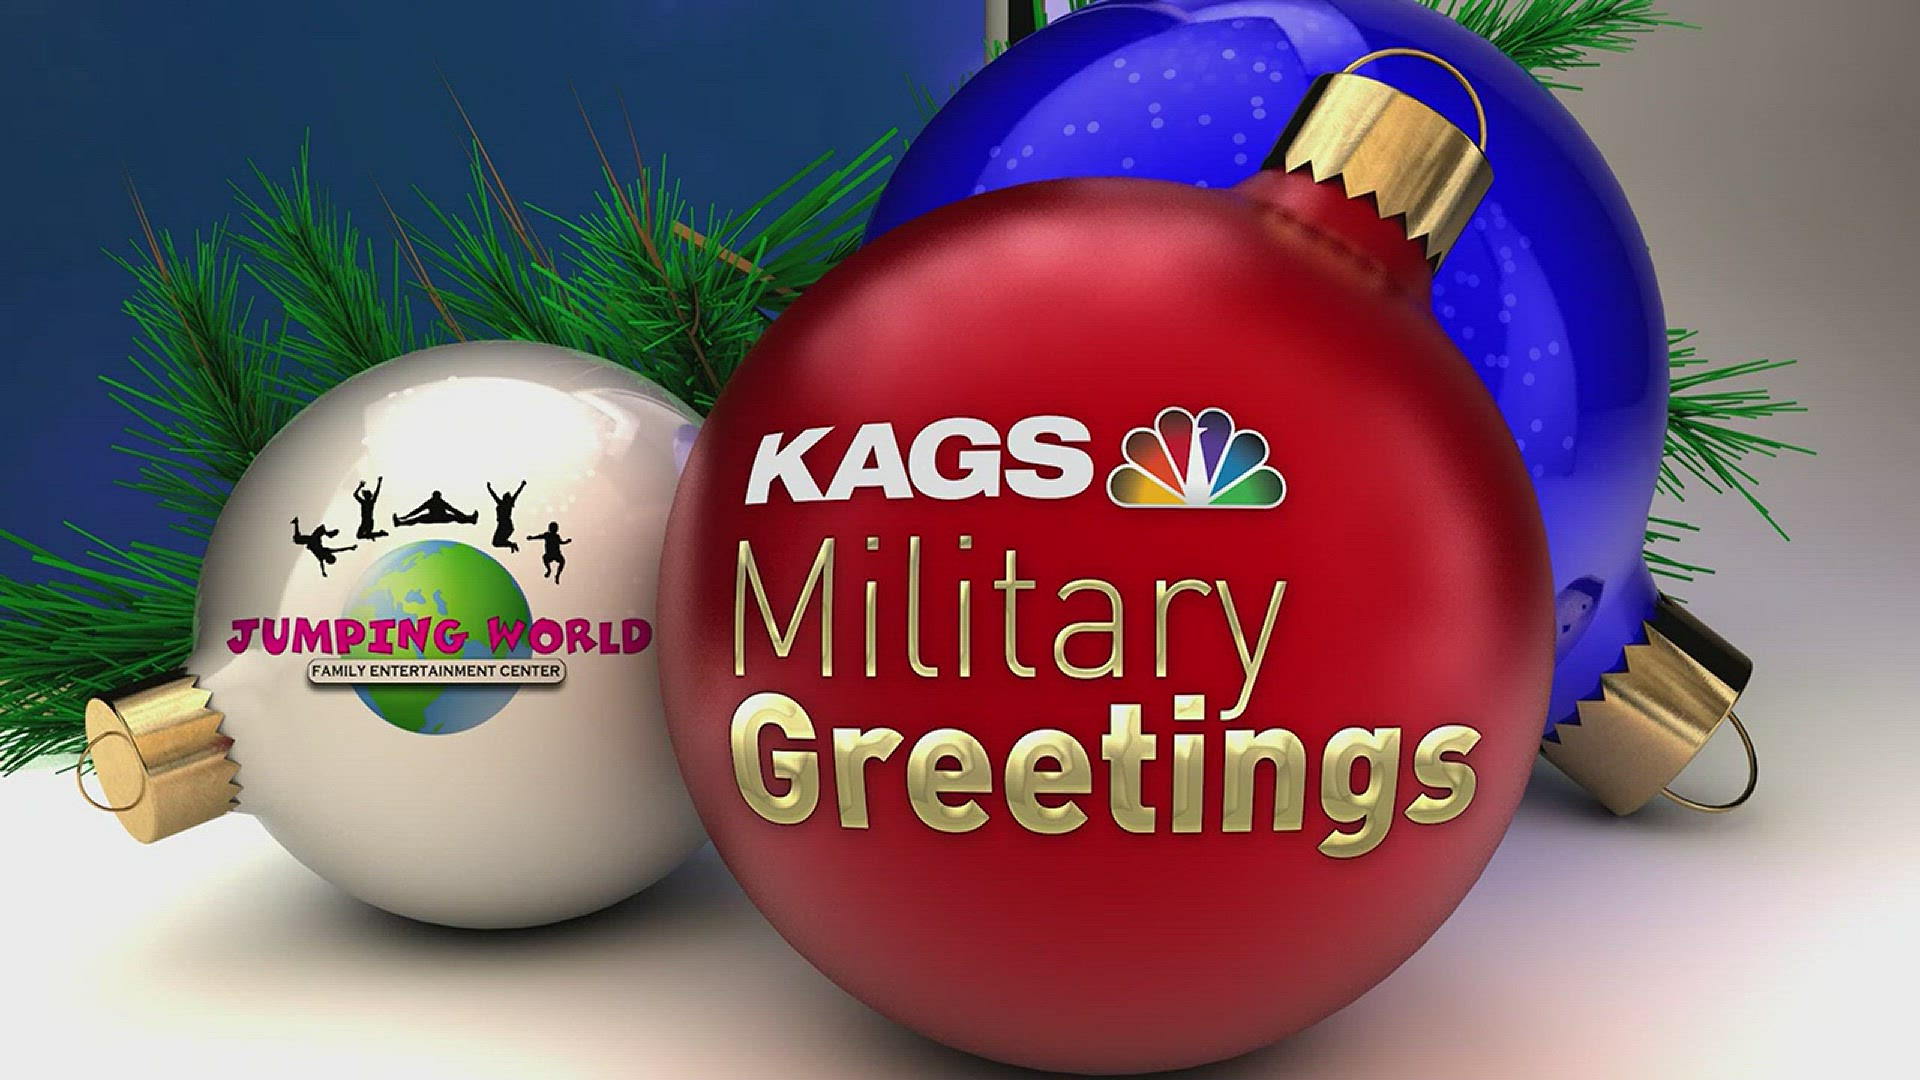 Jumping World presents Military greetings from A1C Humberto Garcia and LCDR Scott Walters